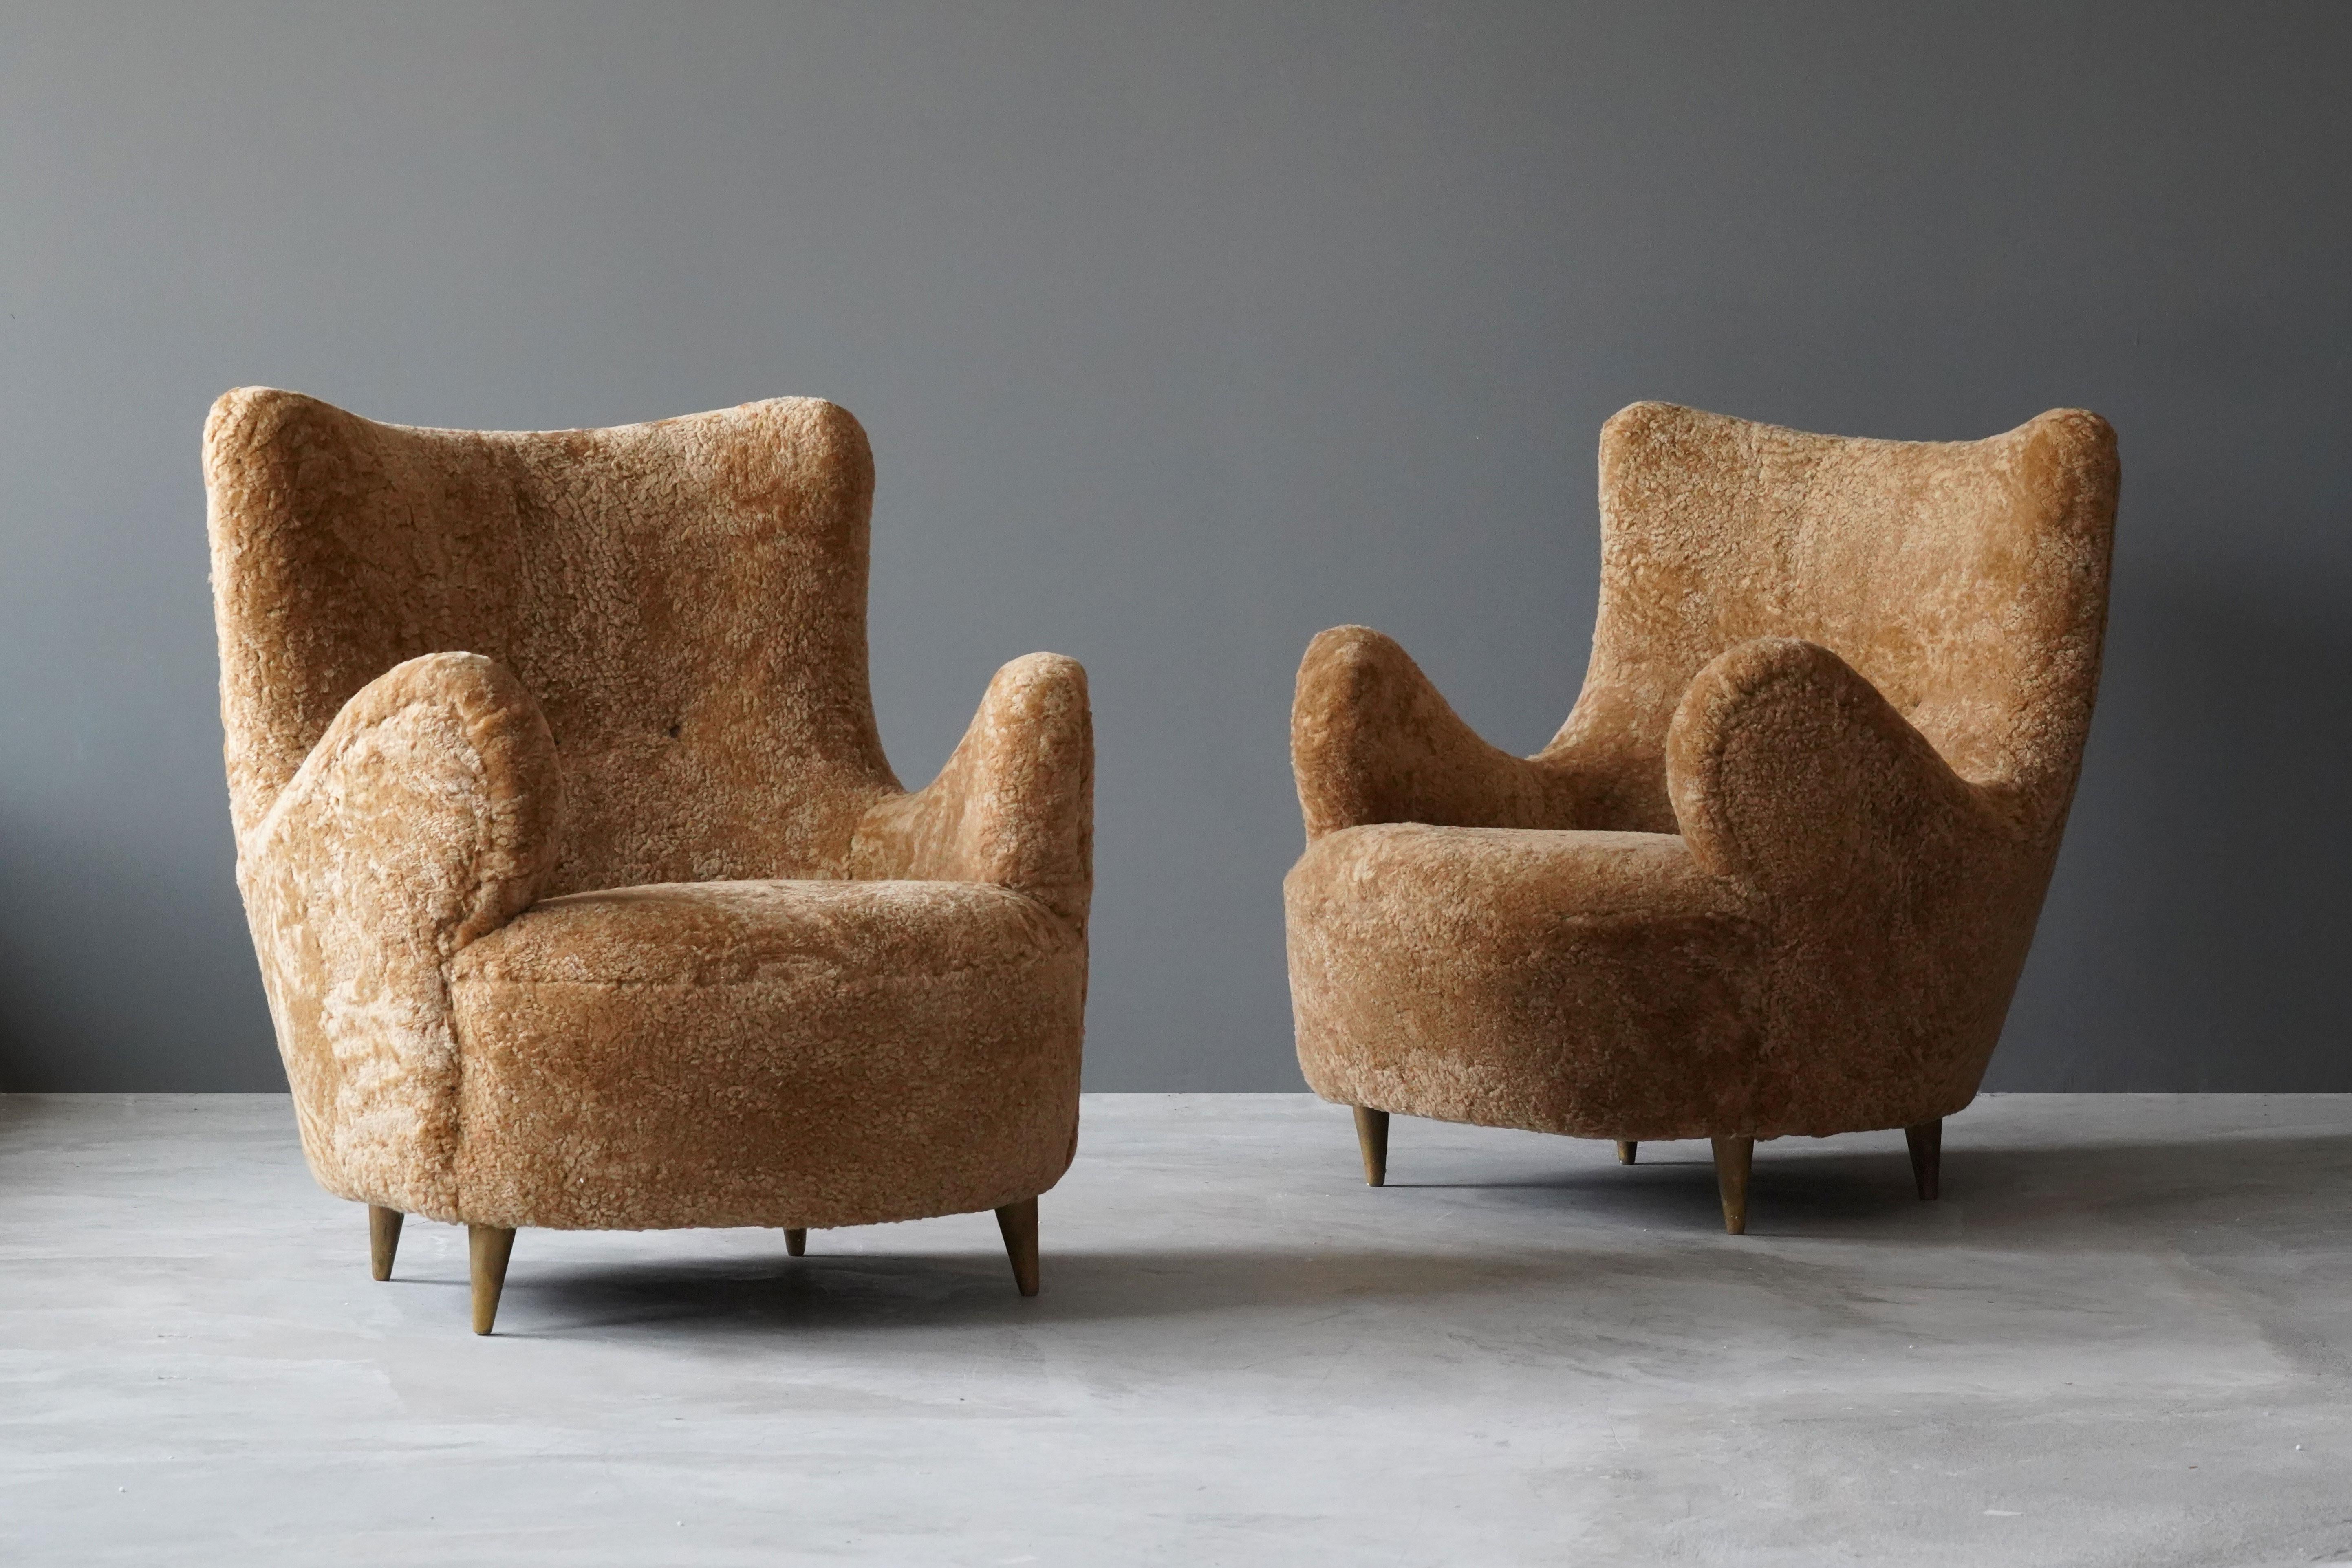 A pair of highly modernist lounge chairs. Designed by an unknown Italian designer, produced 1940s, Italy. Features a highly expressive organic form, the progressive expression of design is further enhanced by the gold painted legs.

Other